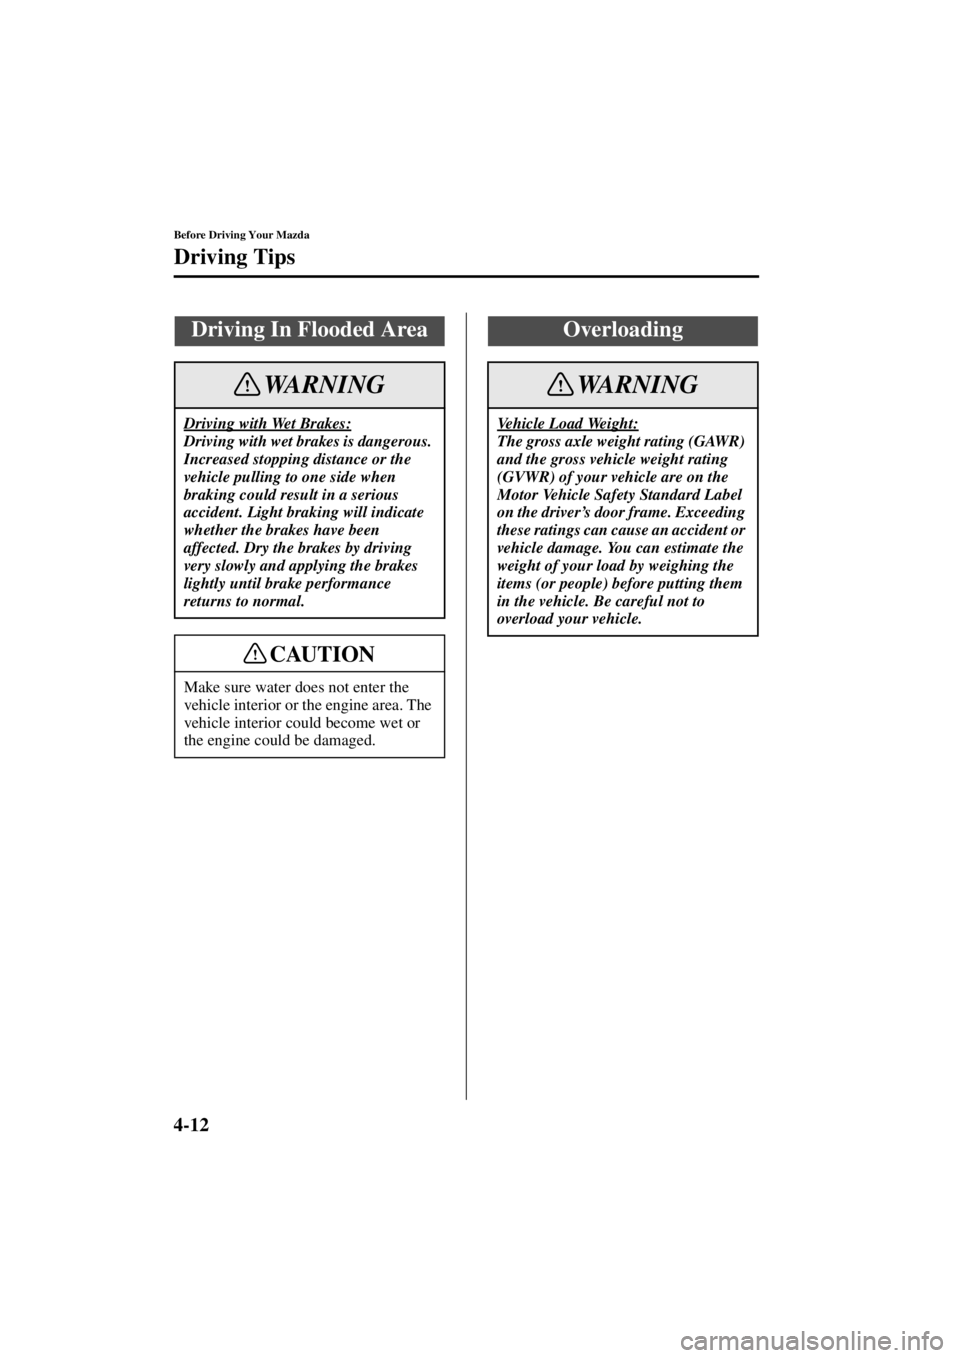 MAZDA MODEL 3 5-DOOR 2004 Service Manual 4-12
Before Driving Your Mazda
Driving Tips
Form No. 8S18-EA-03I
Driving In Flooded Area
Driving with Wet Brakes:
Driving with wet brakes is dangerous. 
Increased stopping distance or the 
vehicle pul